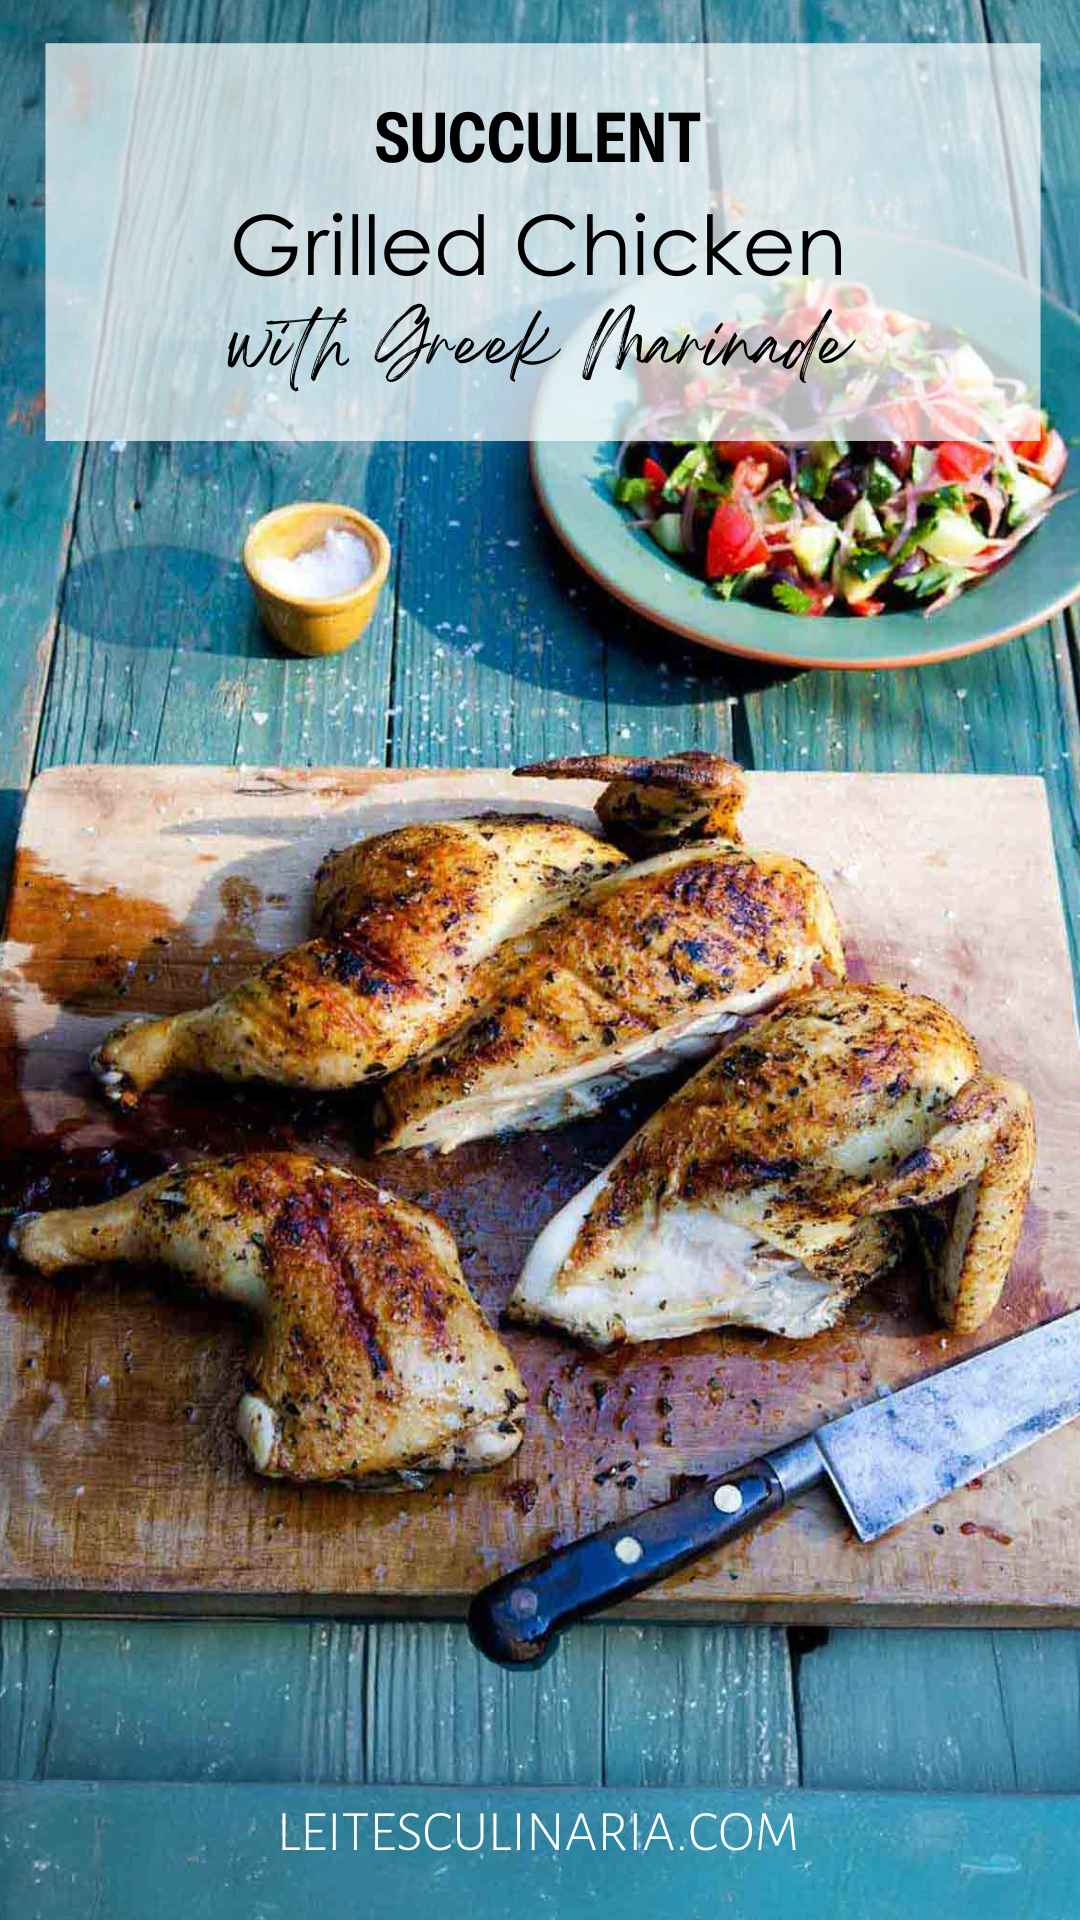 A partially carved grilled marinated chicken on a wooden board with a Greek salad nearby.